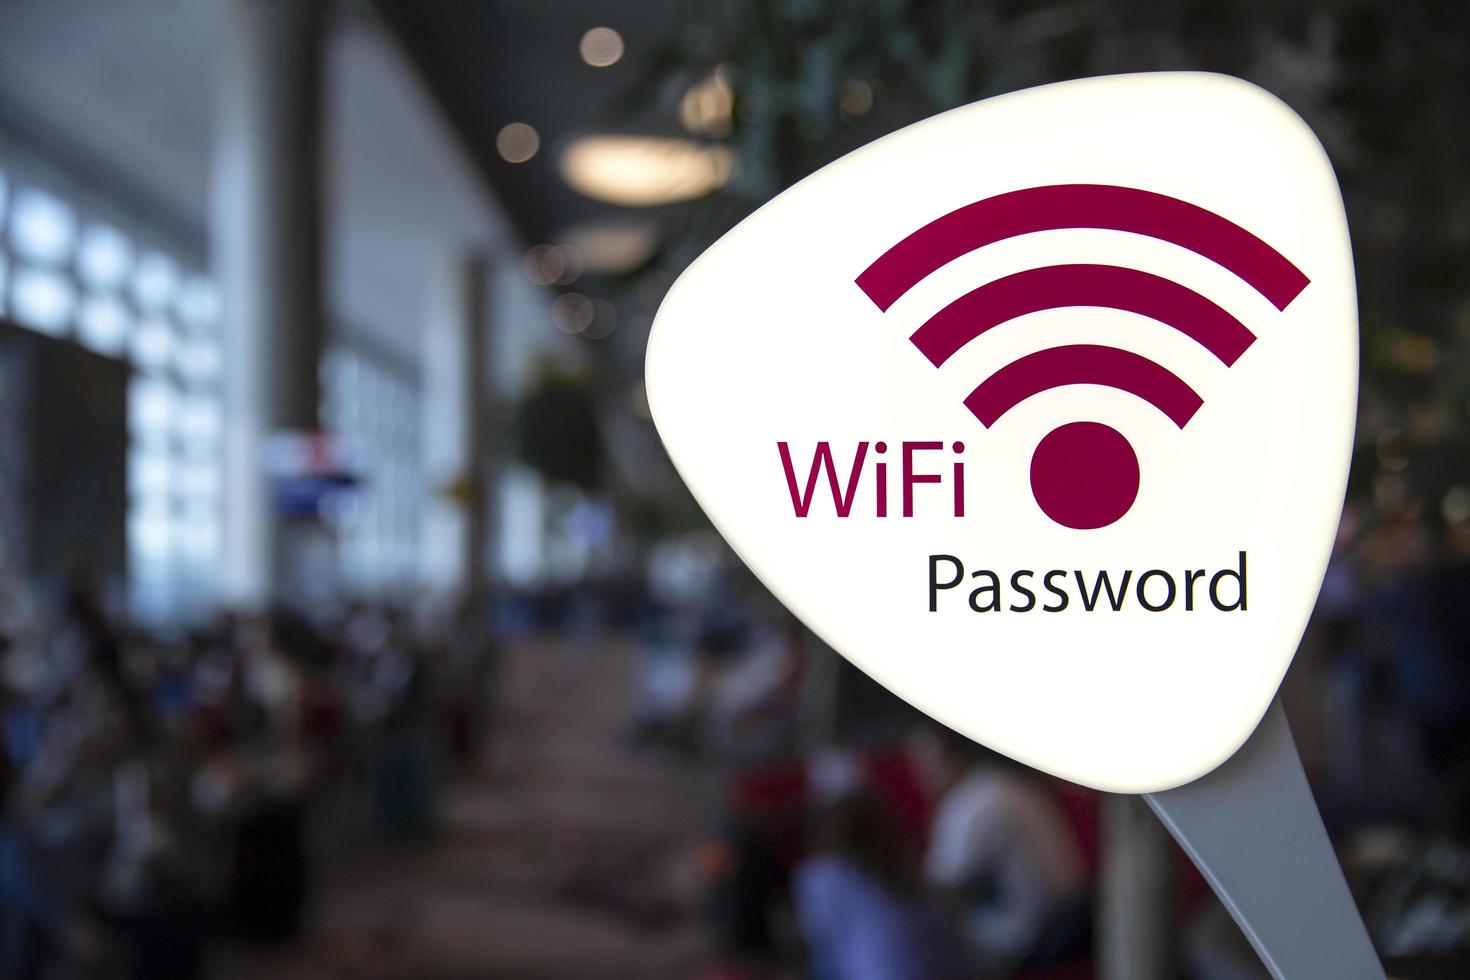 WiFi password sign in airport photo